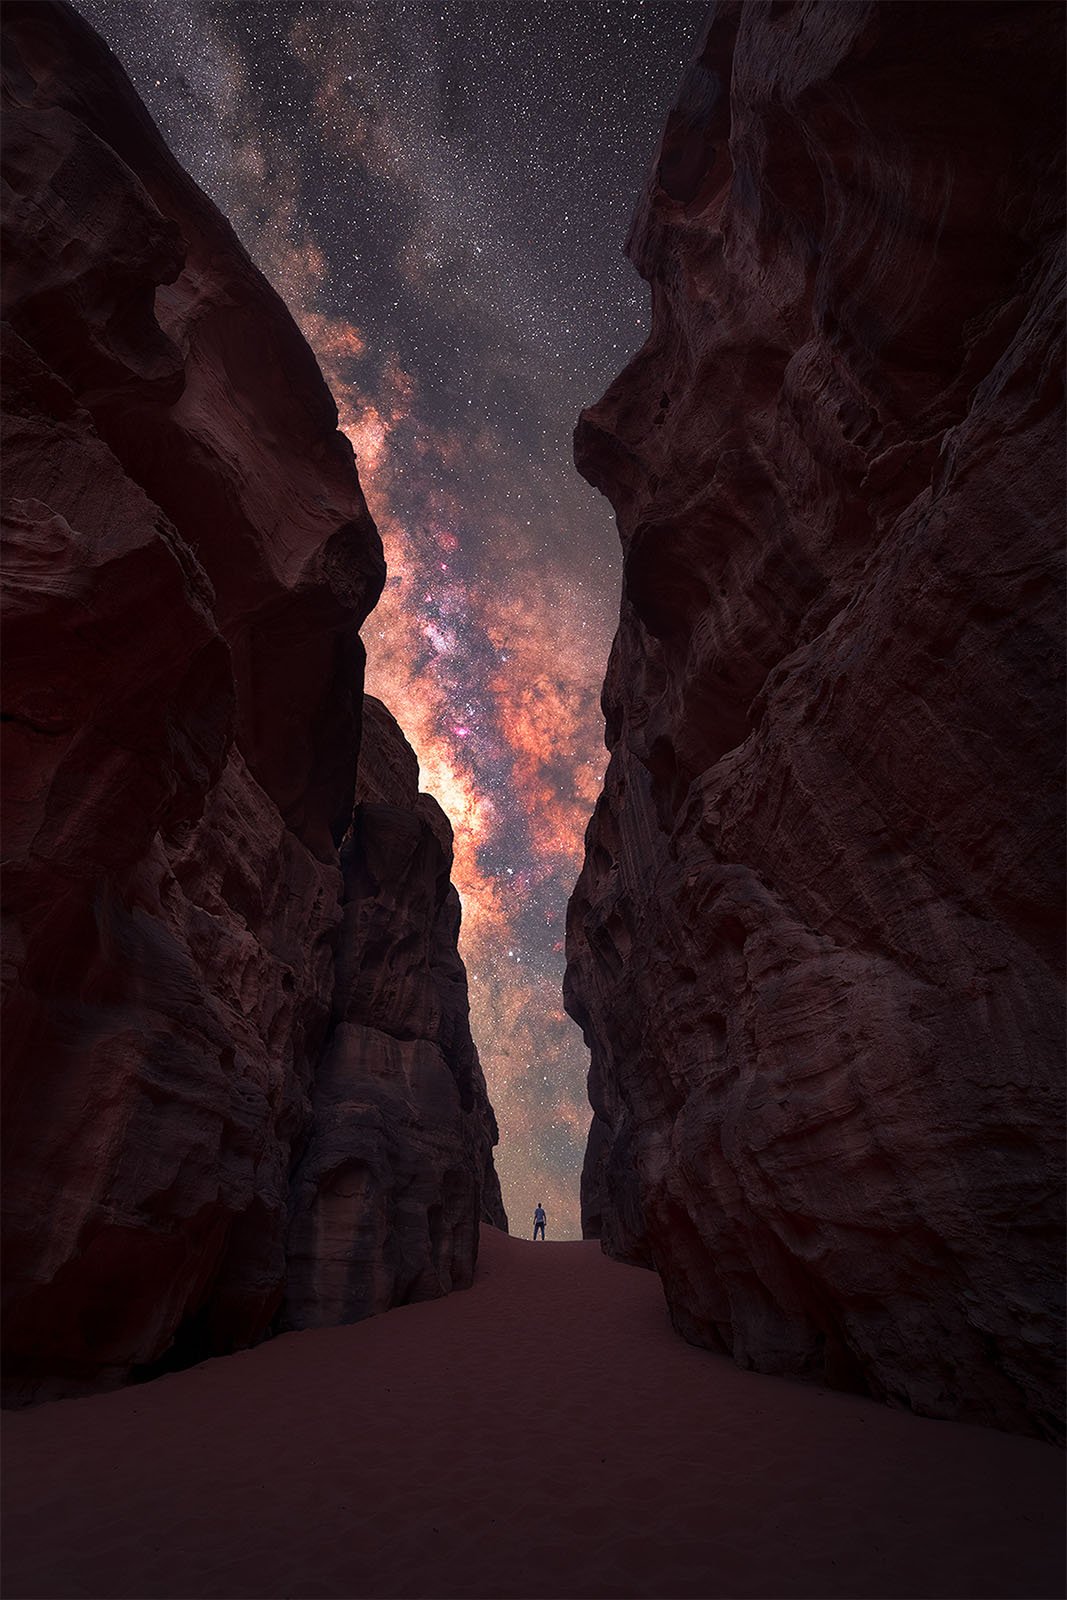  A person stands at the end of a narrow canyon looking up at a vividly colorful, star-filled night sky. The towering rock walls of the canyon contrast with the bright, sprawling Milky Way galaxy above. The scene evokes a sense of awe and wonder.